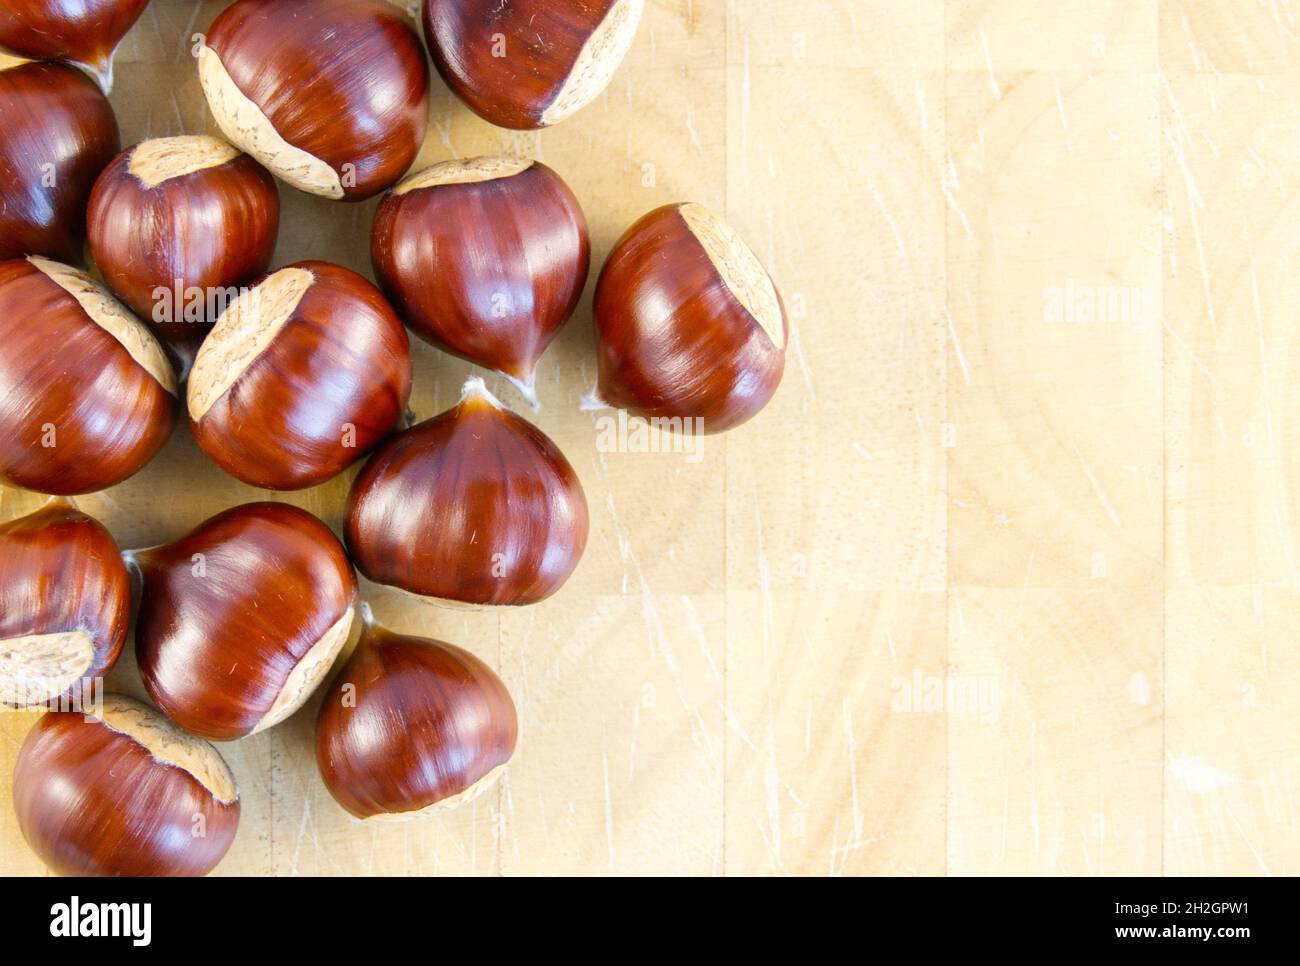 Flat-lay background image of fresh, raw sweet chestnuts on a wooden chopping board Stock Photo